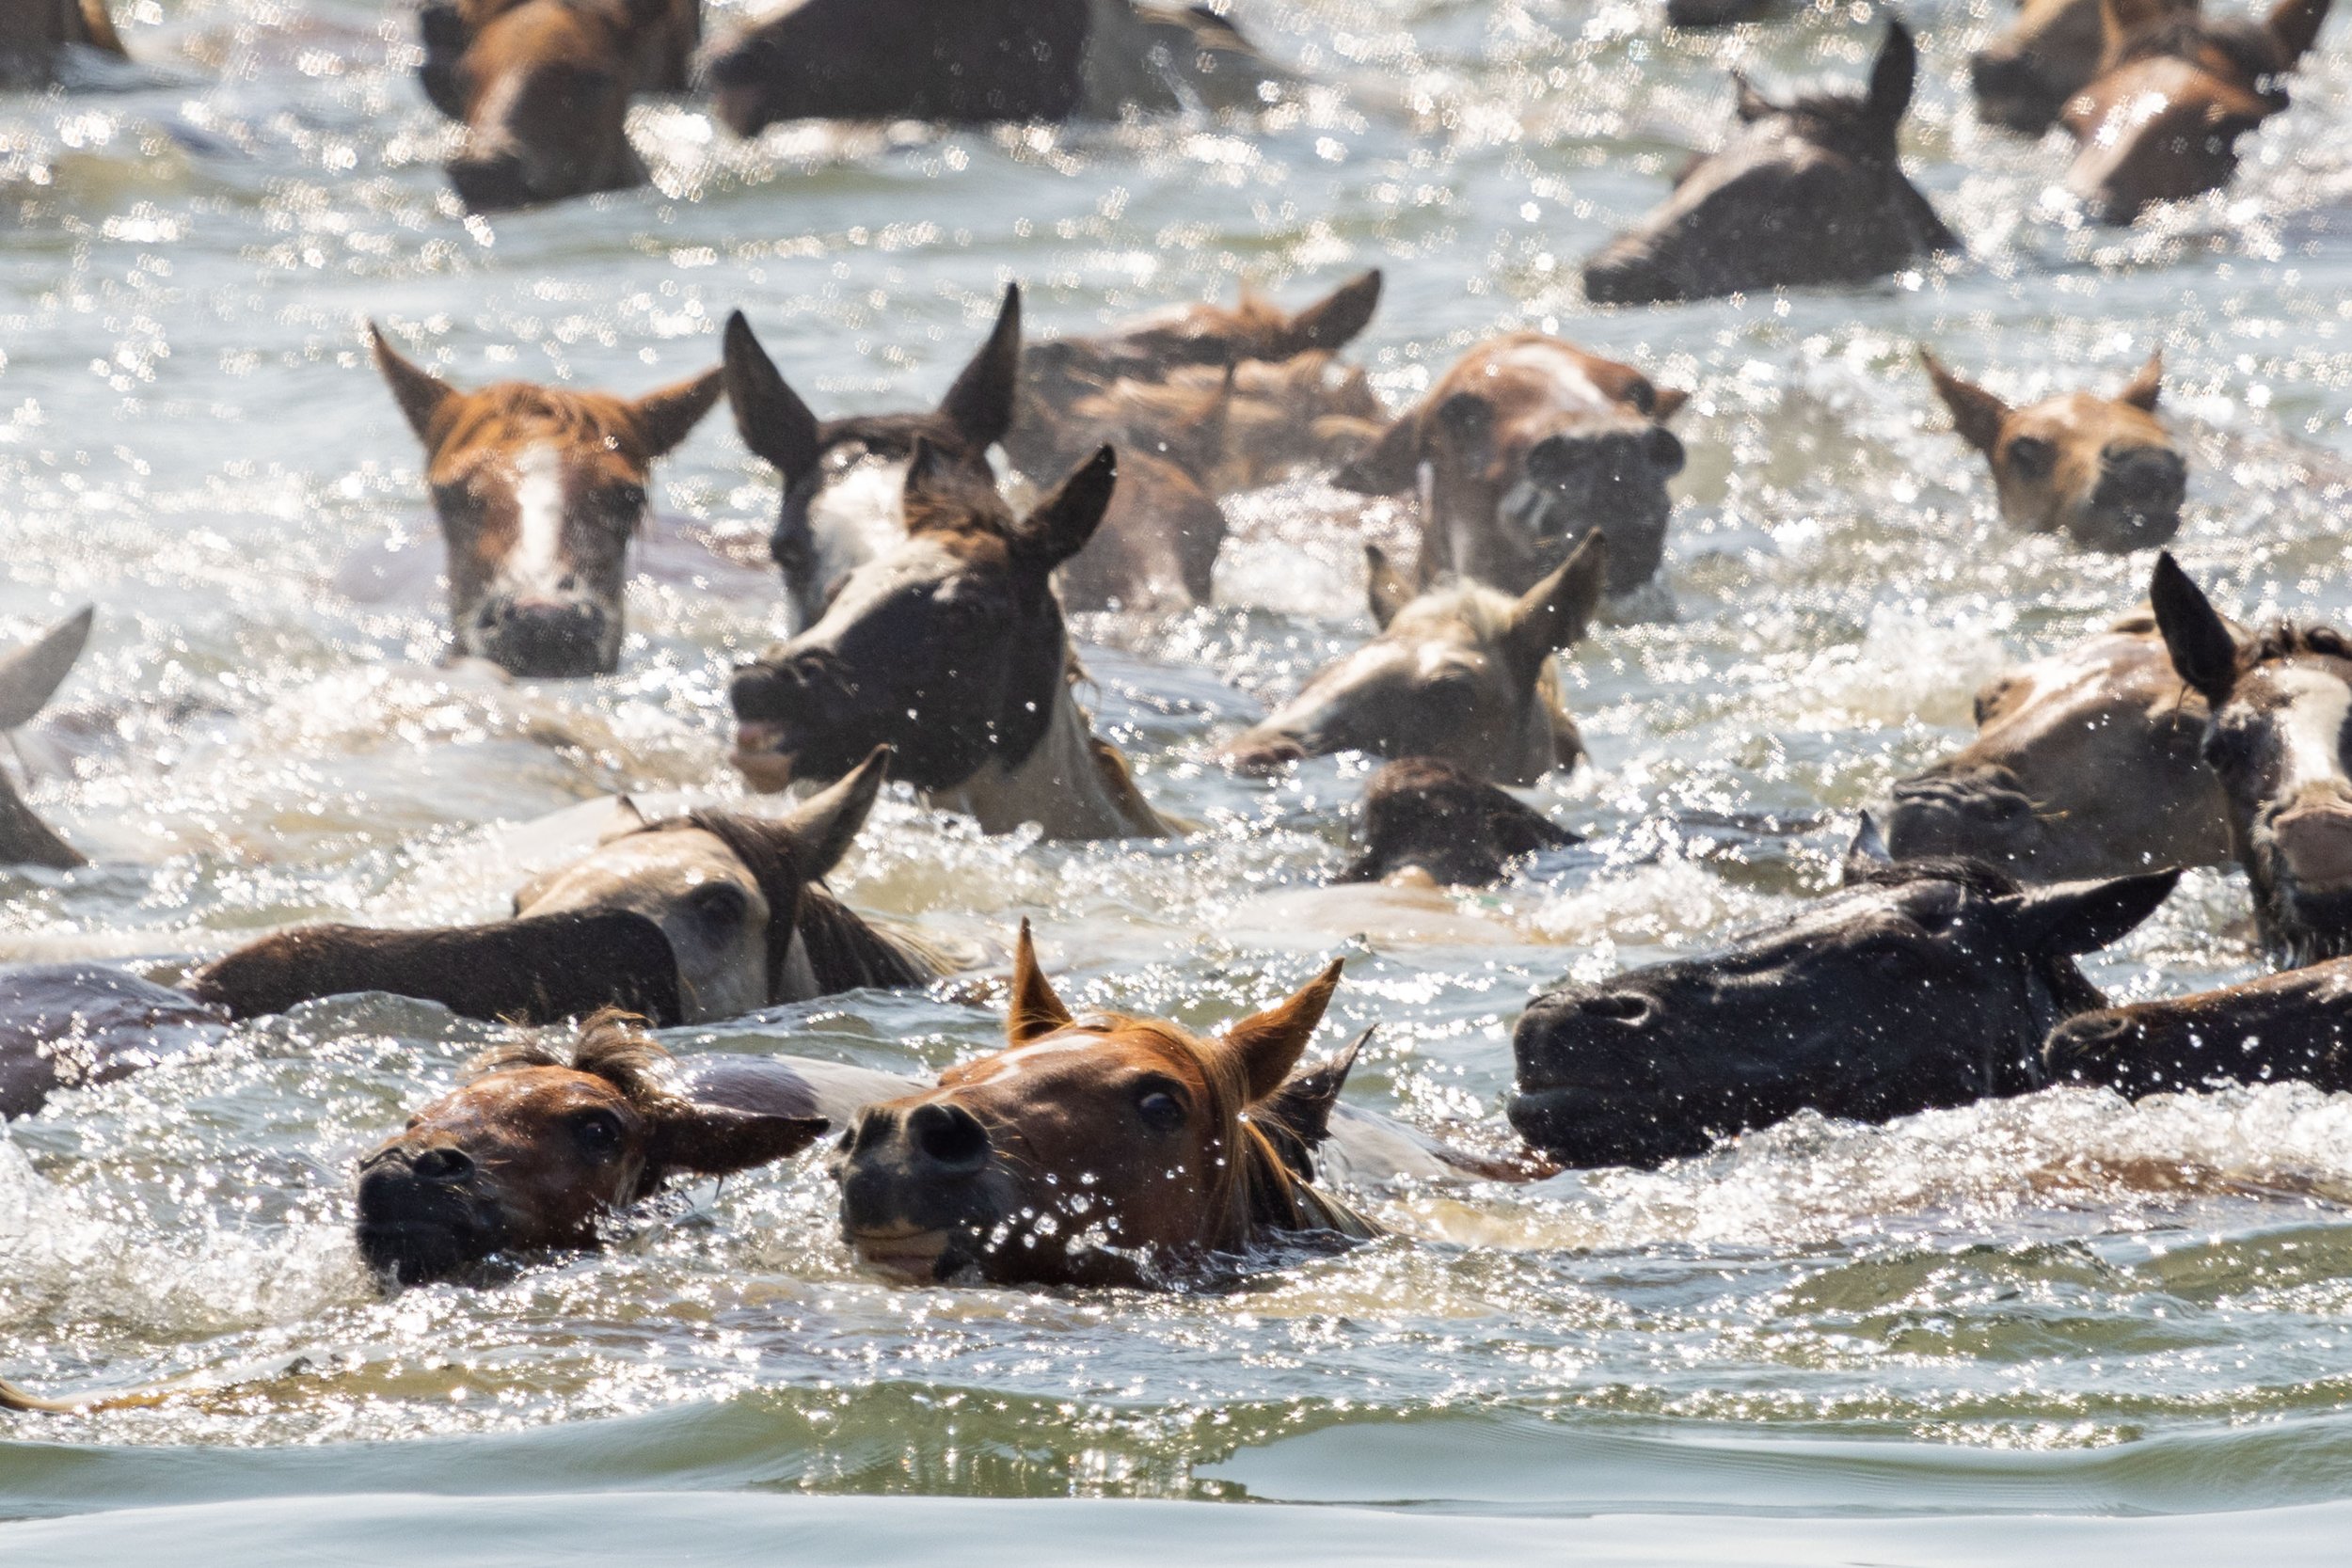  Chincoteague ponies swim at 10:15 a.m. during slack tide from Assateague Island to Chincoteague Island on July 26, 2023, in the 98th annual Chincoteague Pony Swim on the Eastern Shore of Virginia. The swim takes three minutes to complete. (Tess Crow